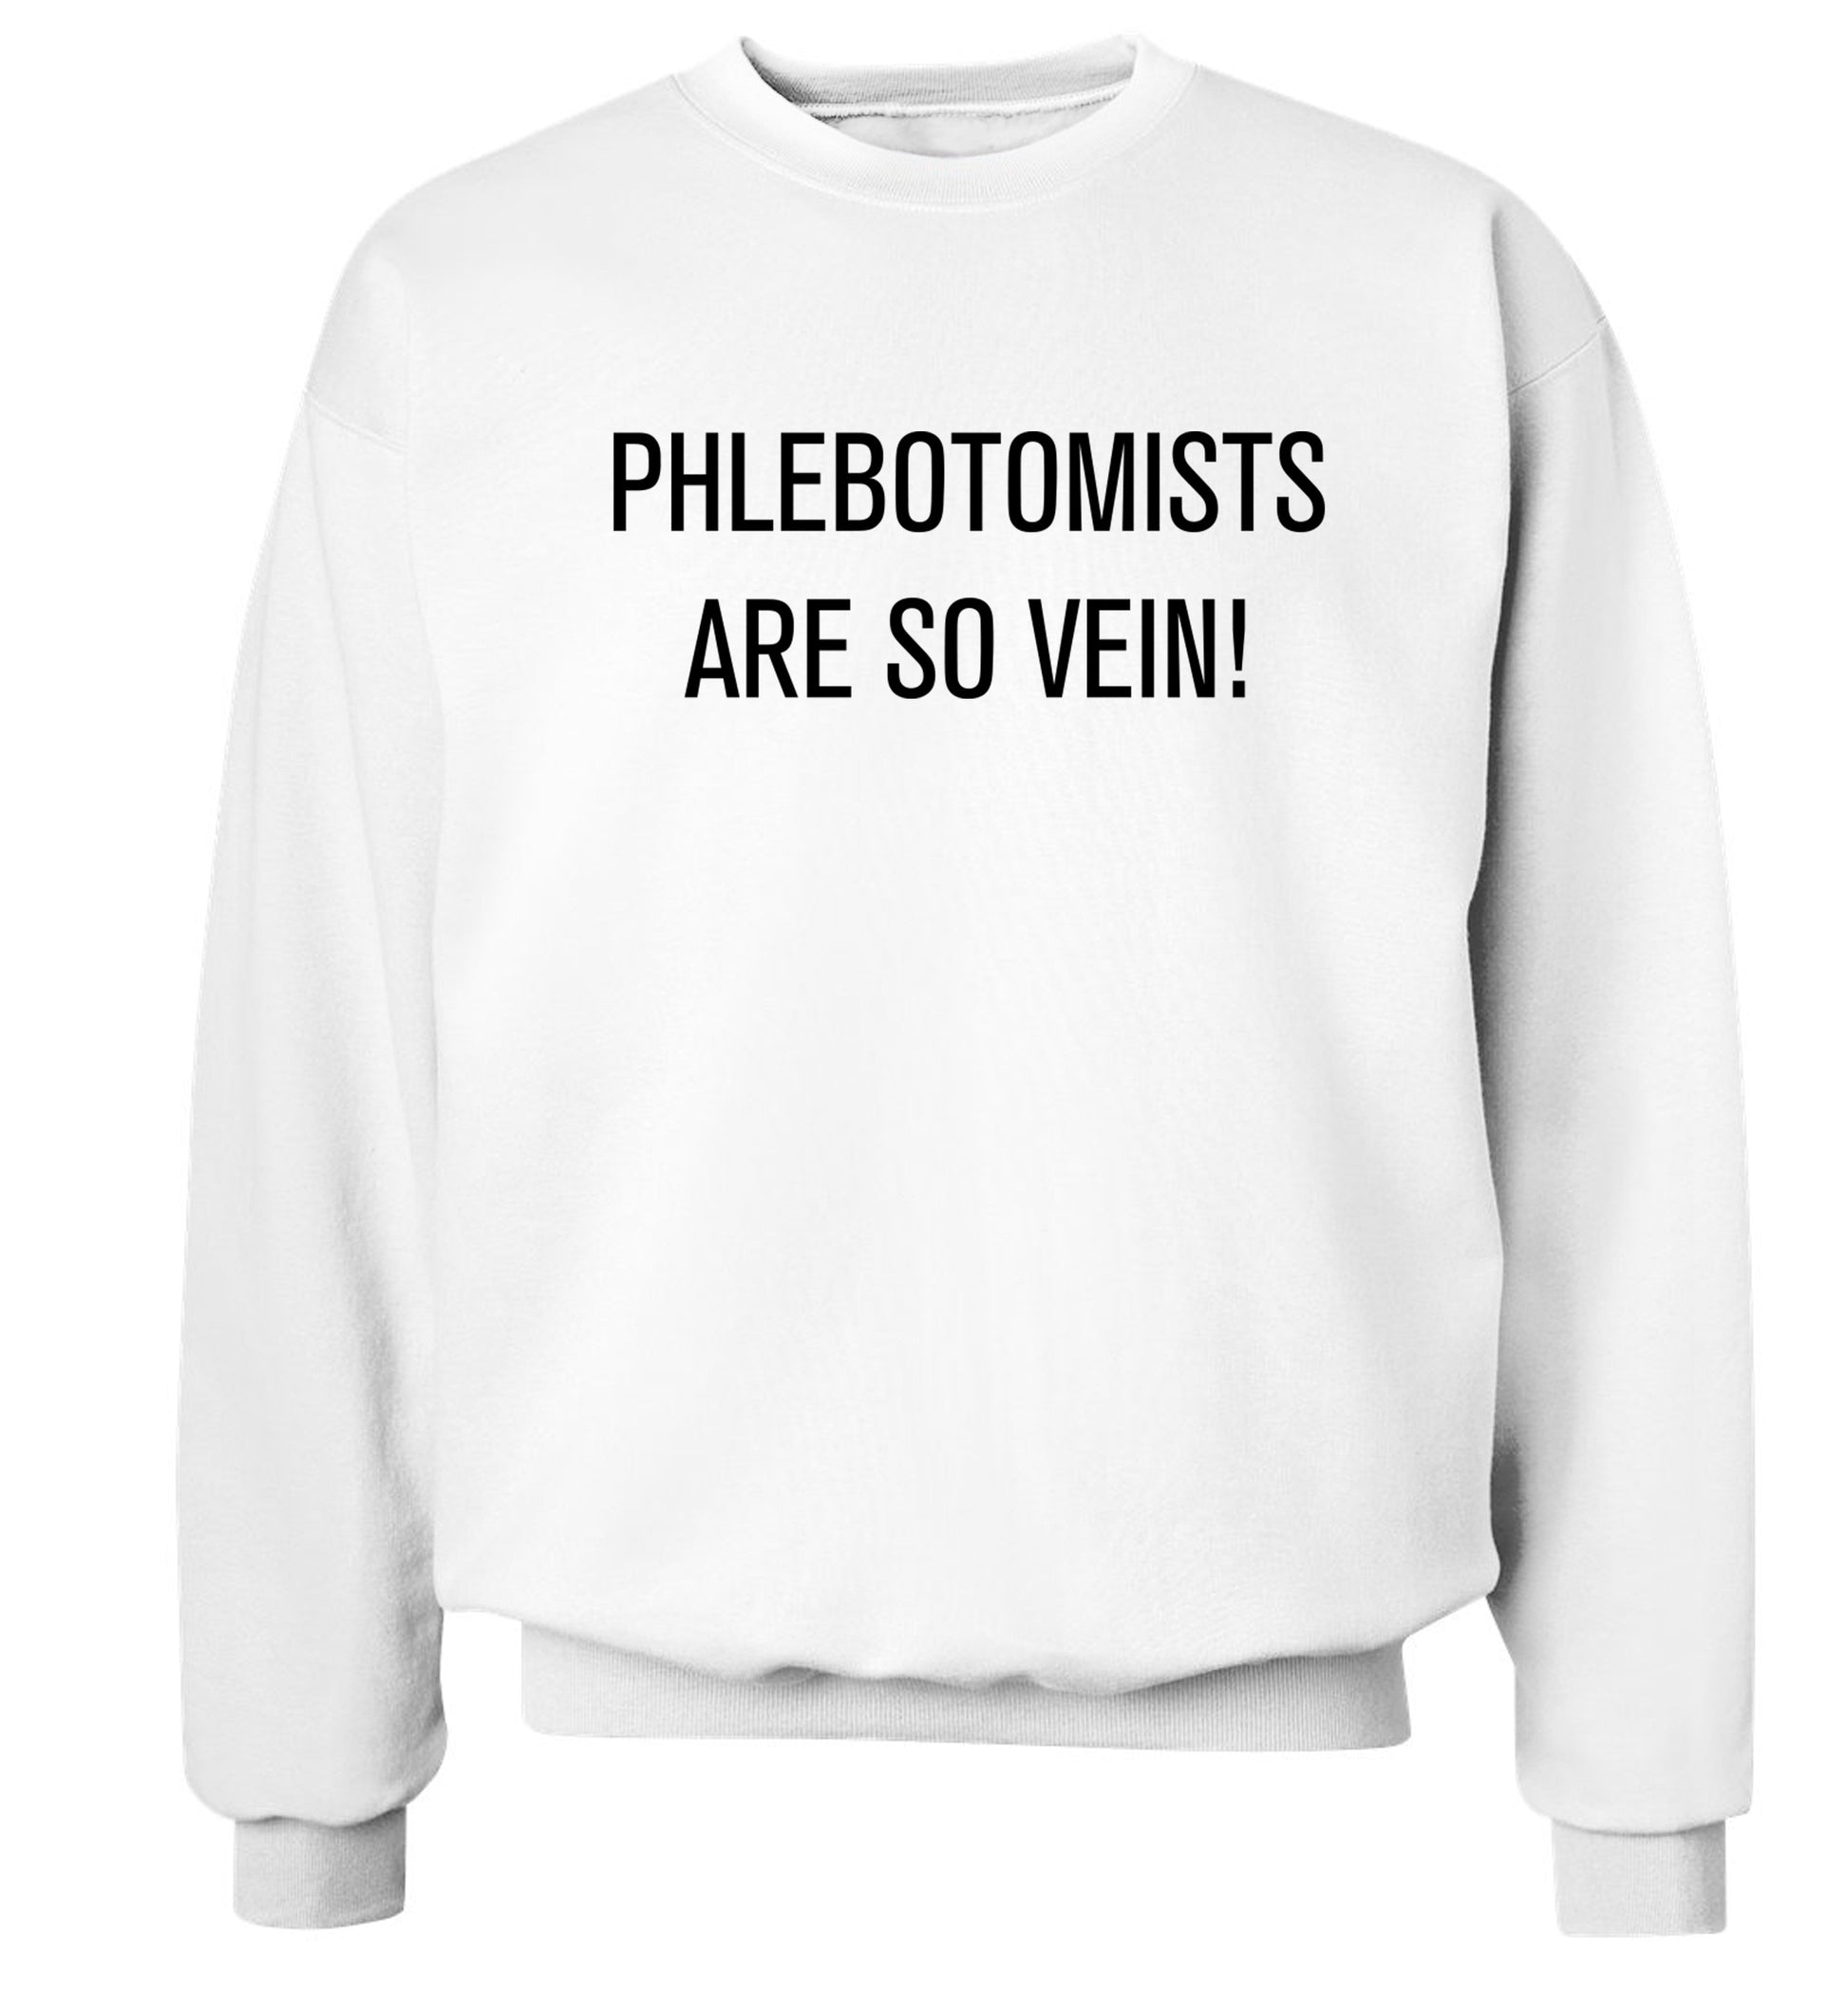 Phlebotomists are so vein! Adult's unisex white Sweater 2XL